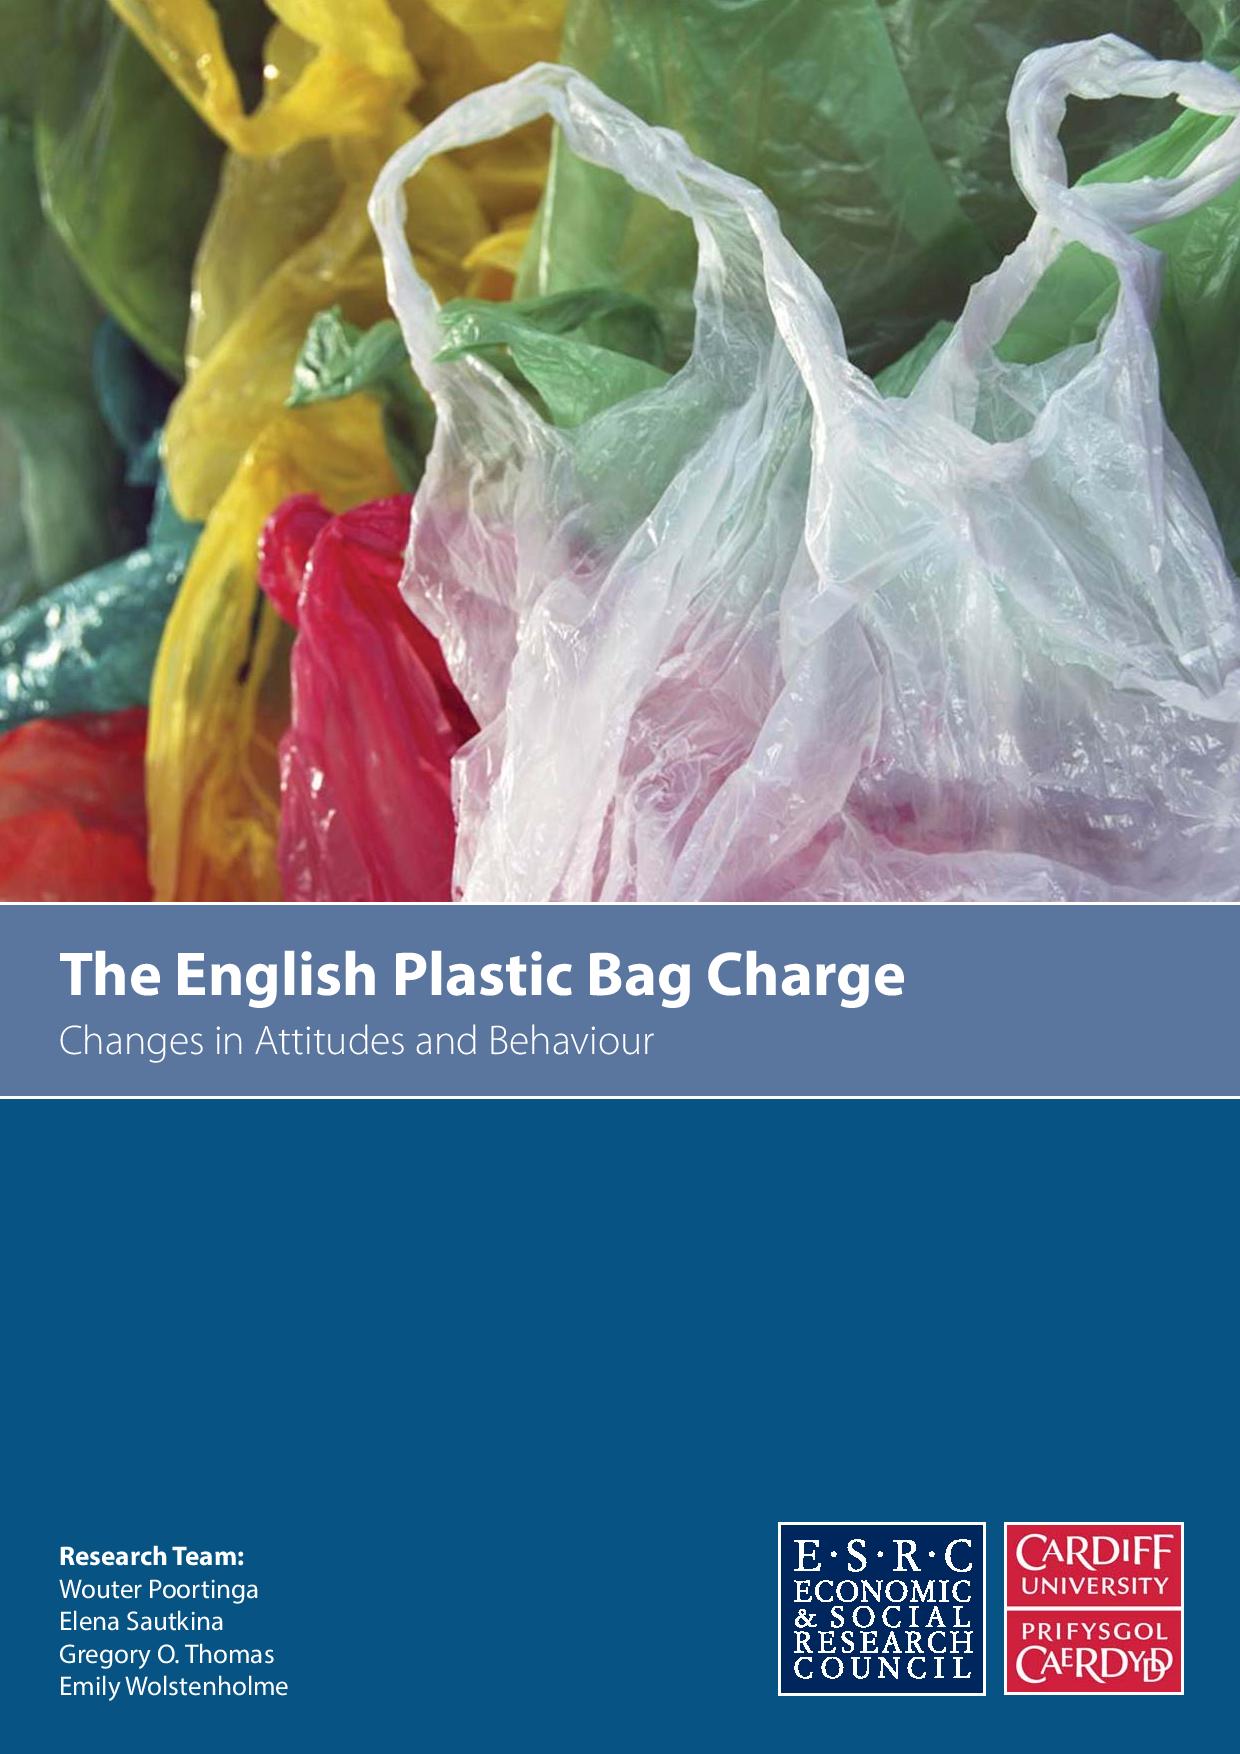 The English plastic bag charge: Changes in attitudes and behaviour. [Project Report]